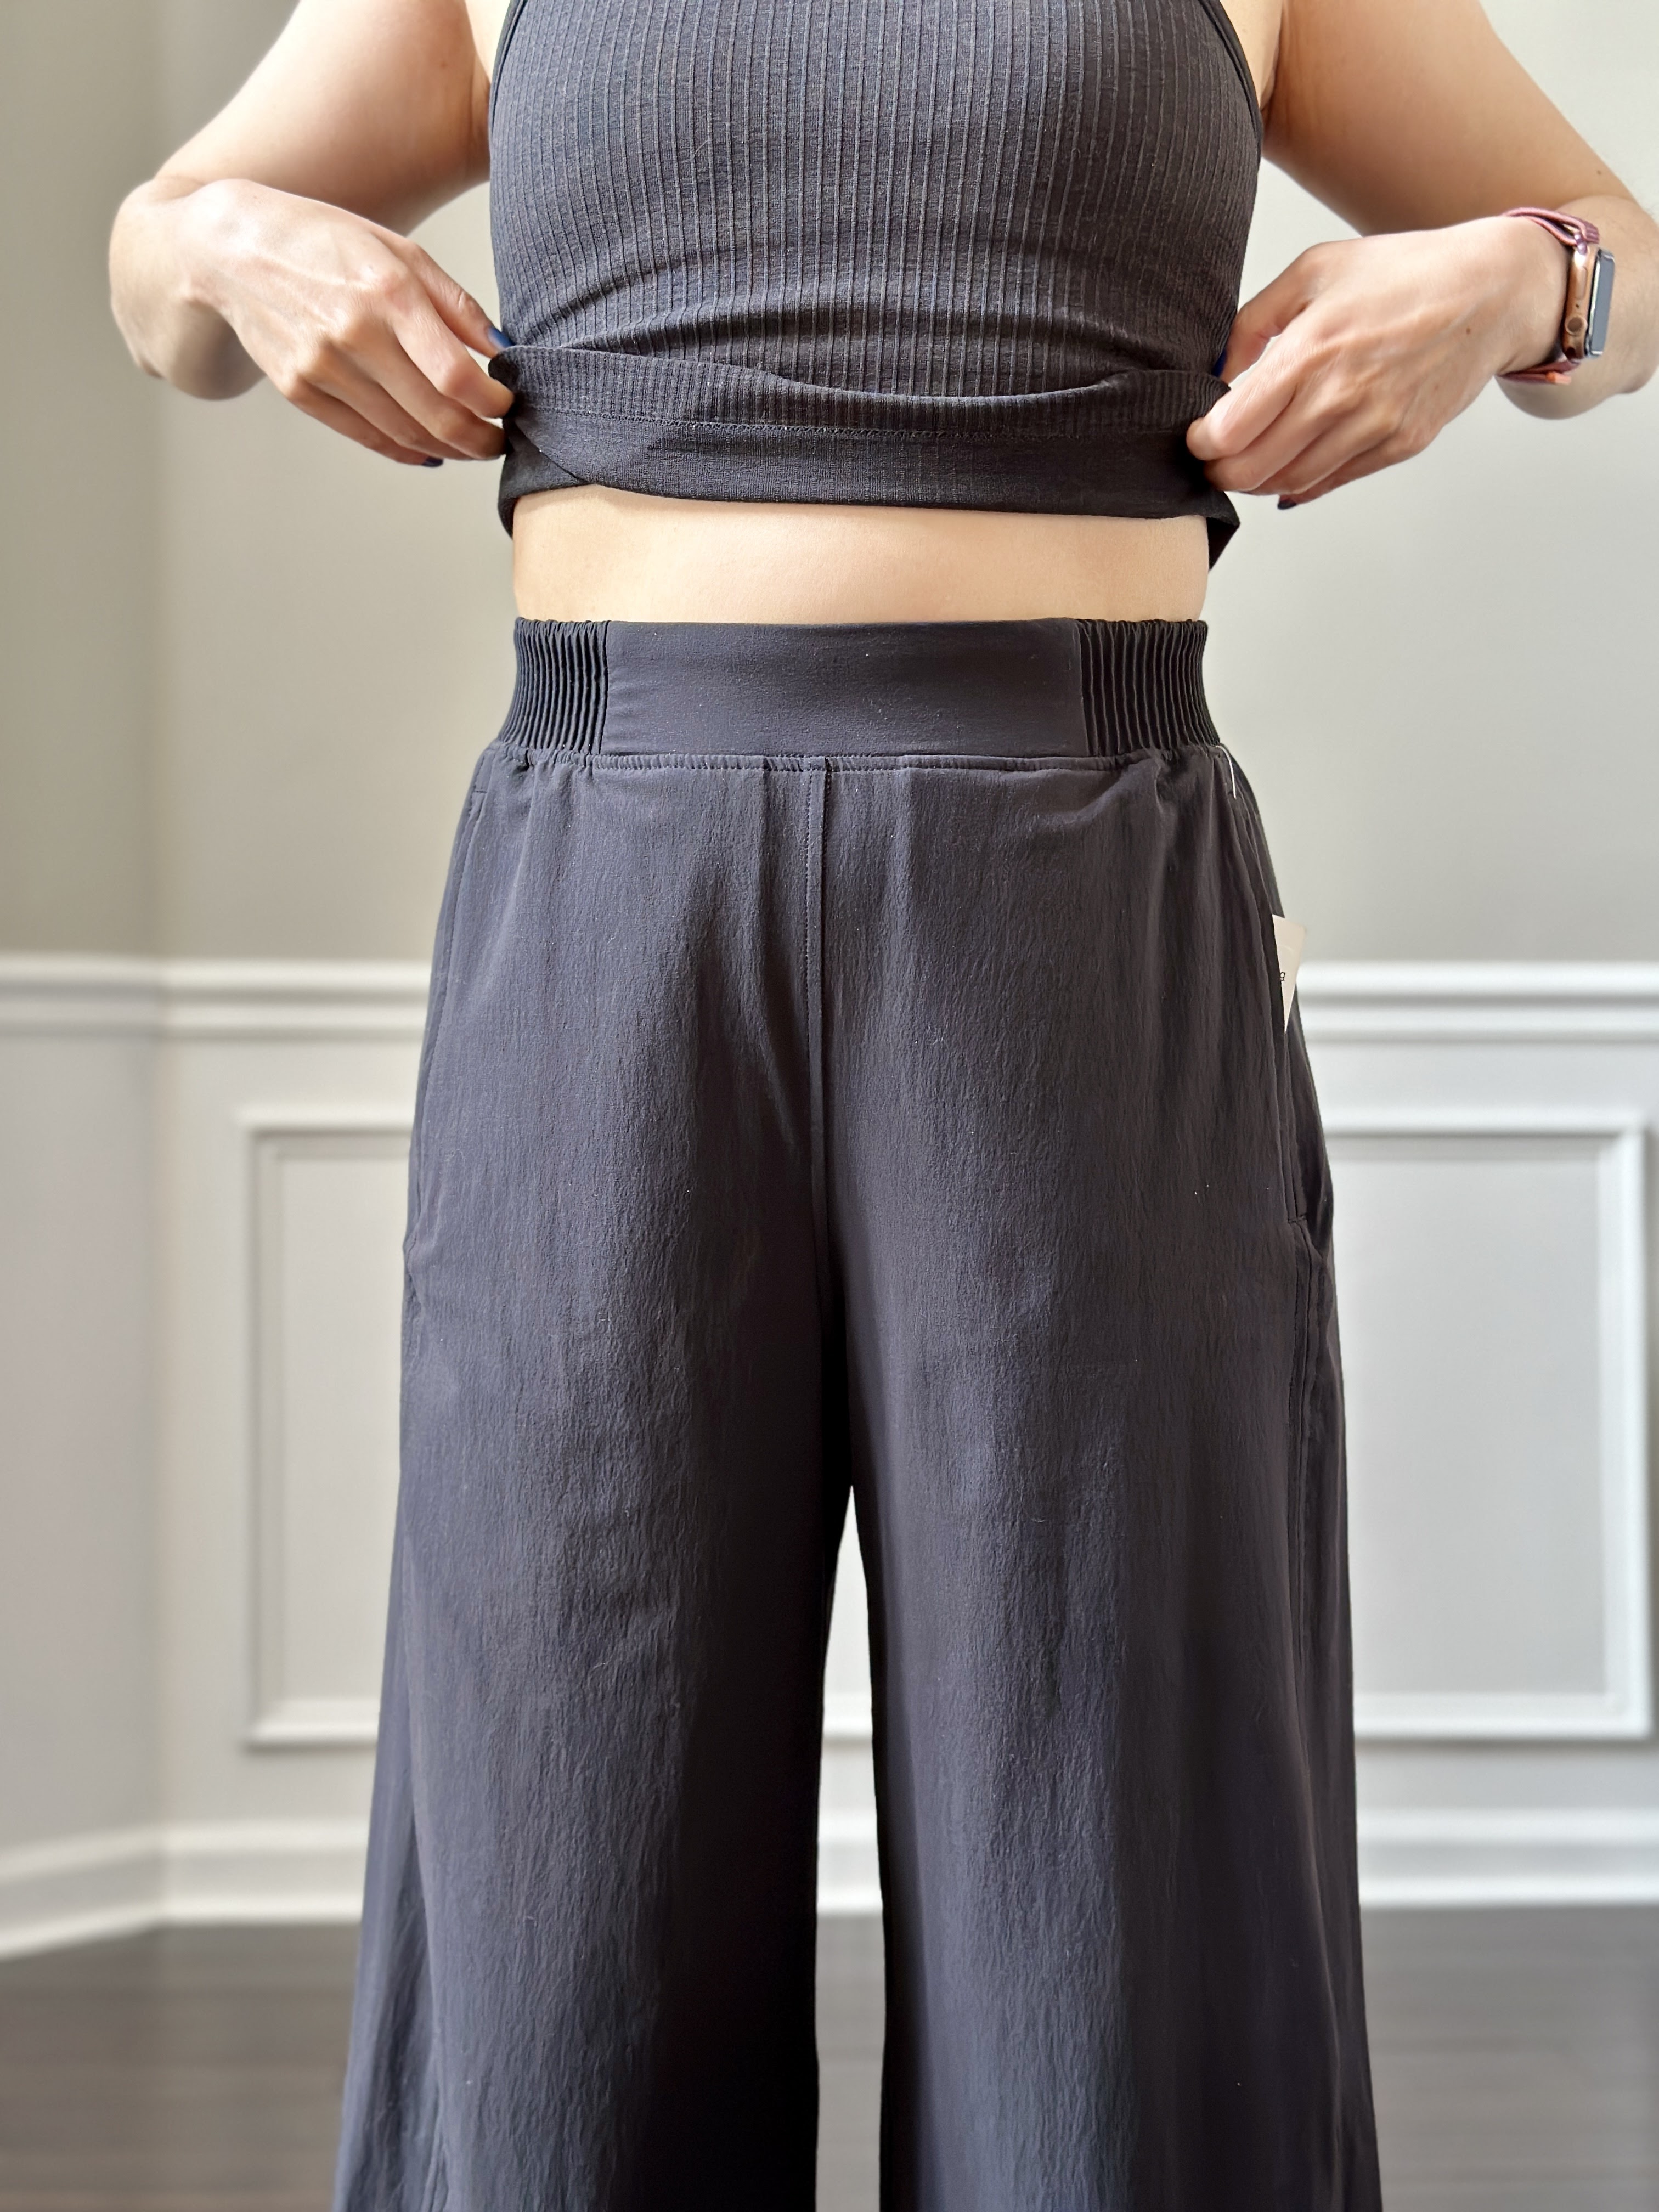 Fit Review Friday! Stretch Woven Wide-Leg High-Rise Cropped Pant